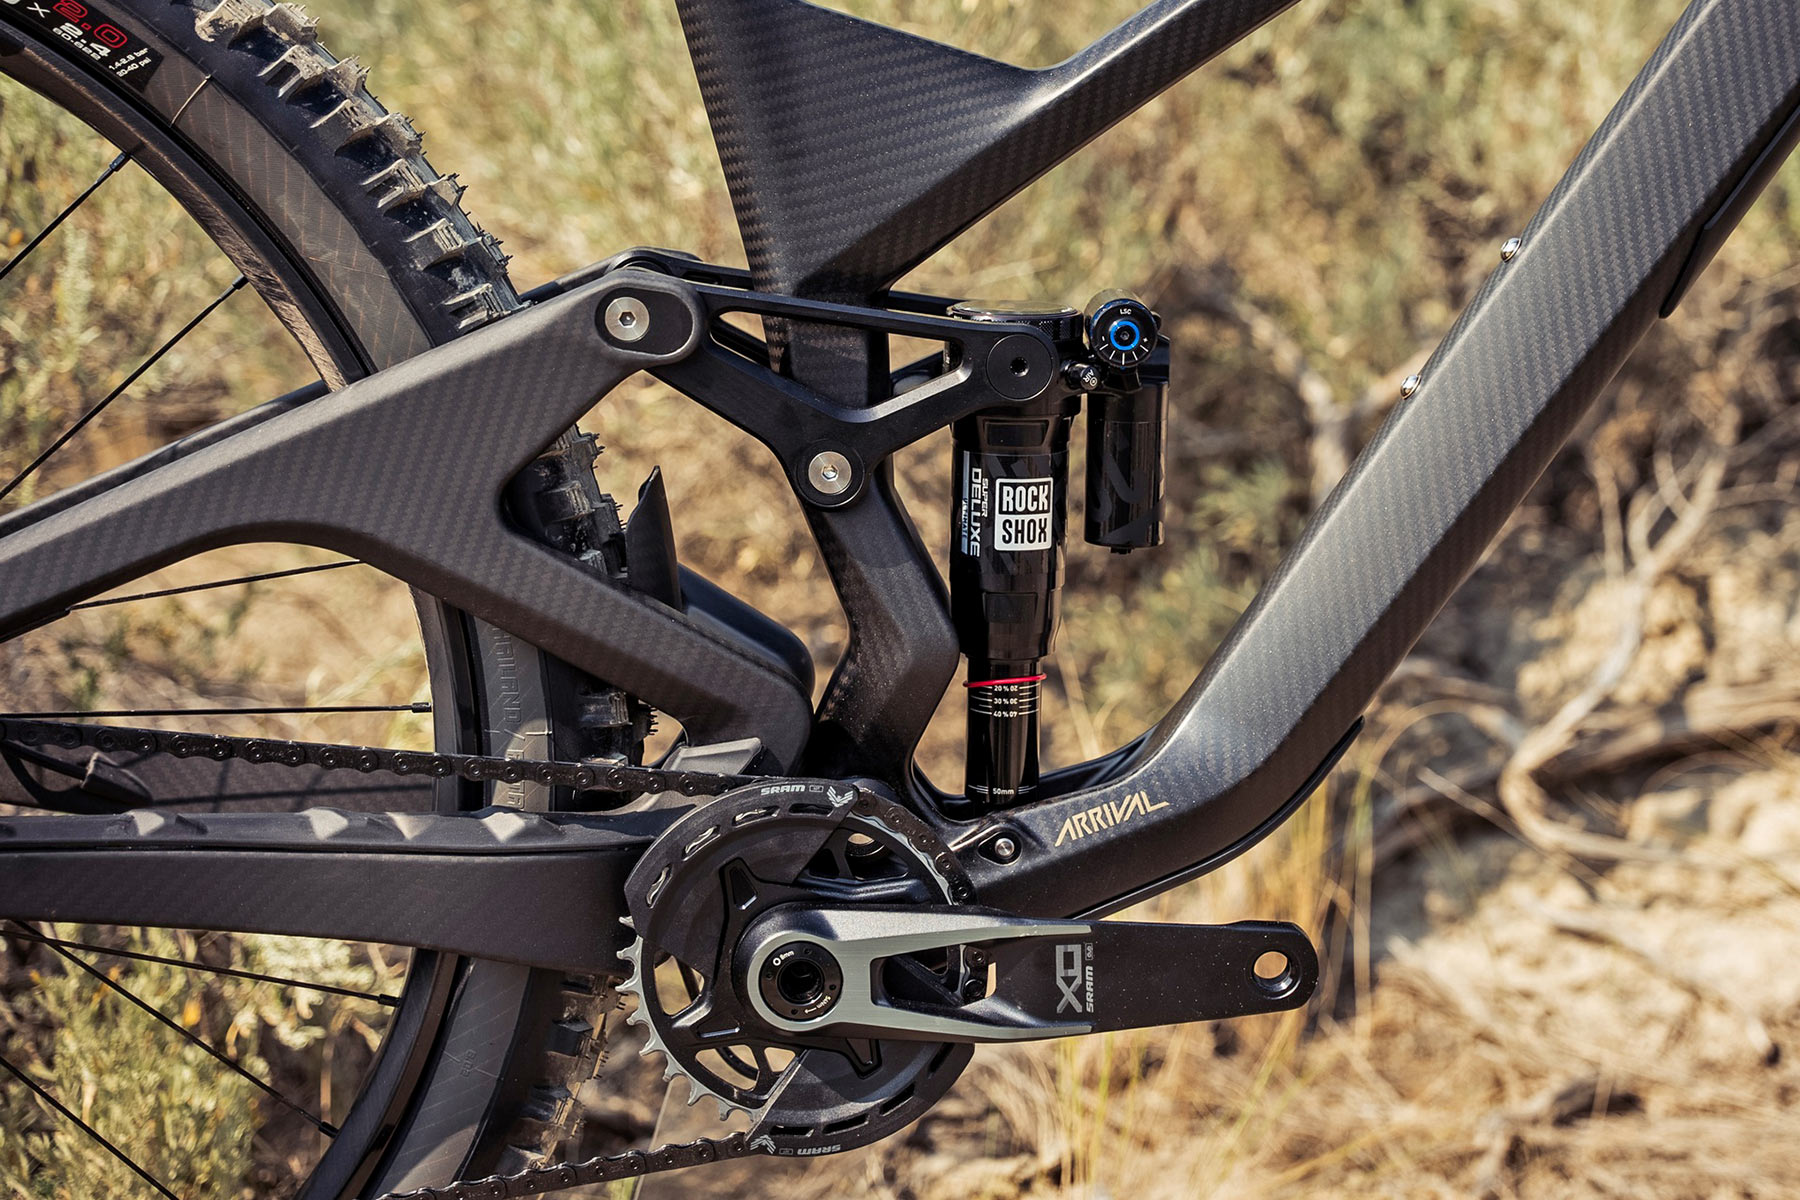 We Are One Arrival limited edition modular carbon mountain bike made-in-Canada, 130mm Trail, 152mm All-Mountain, 170mm Enduro bikes, new rear end